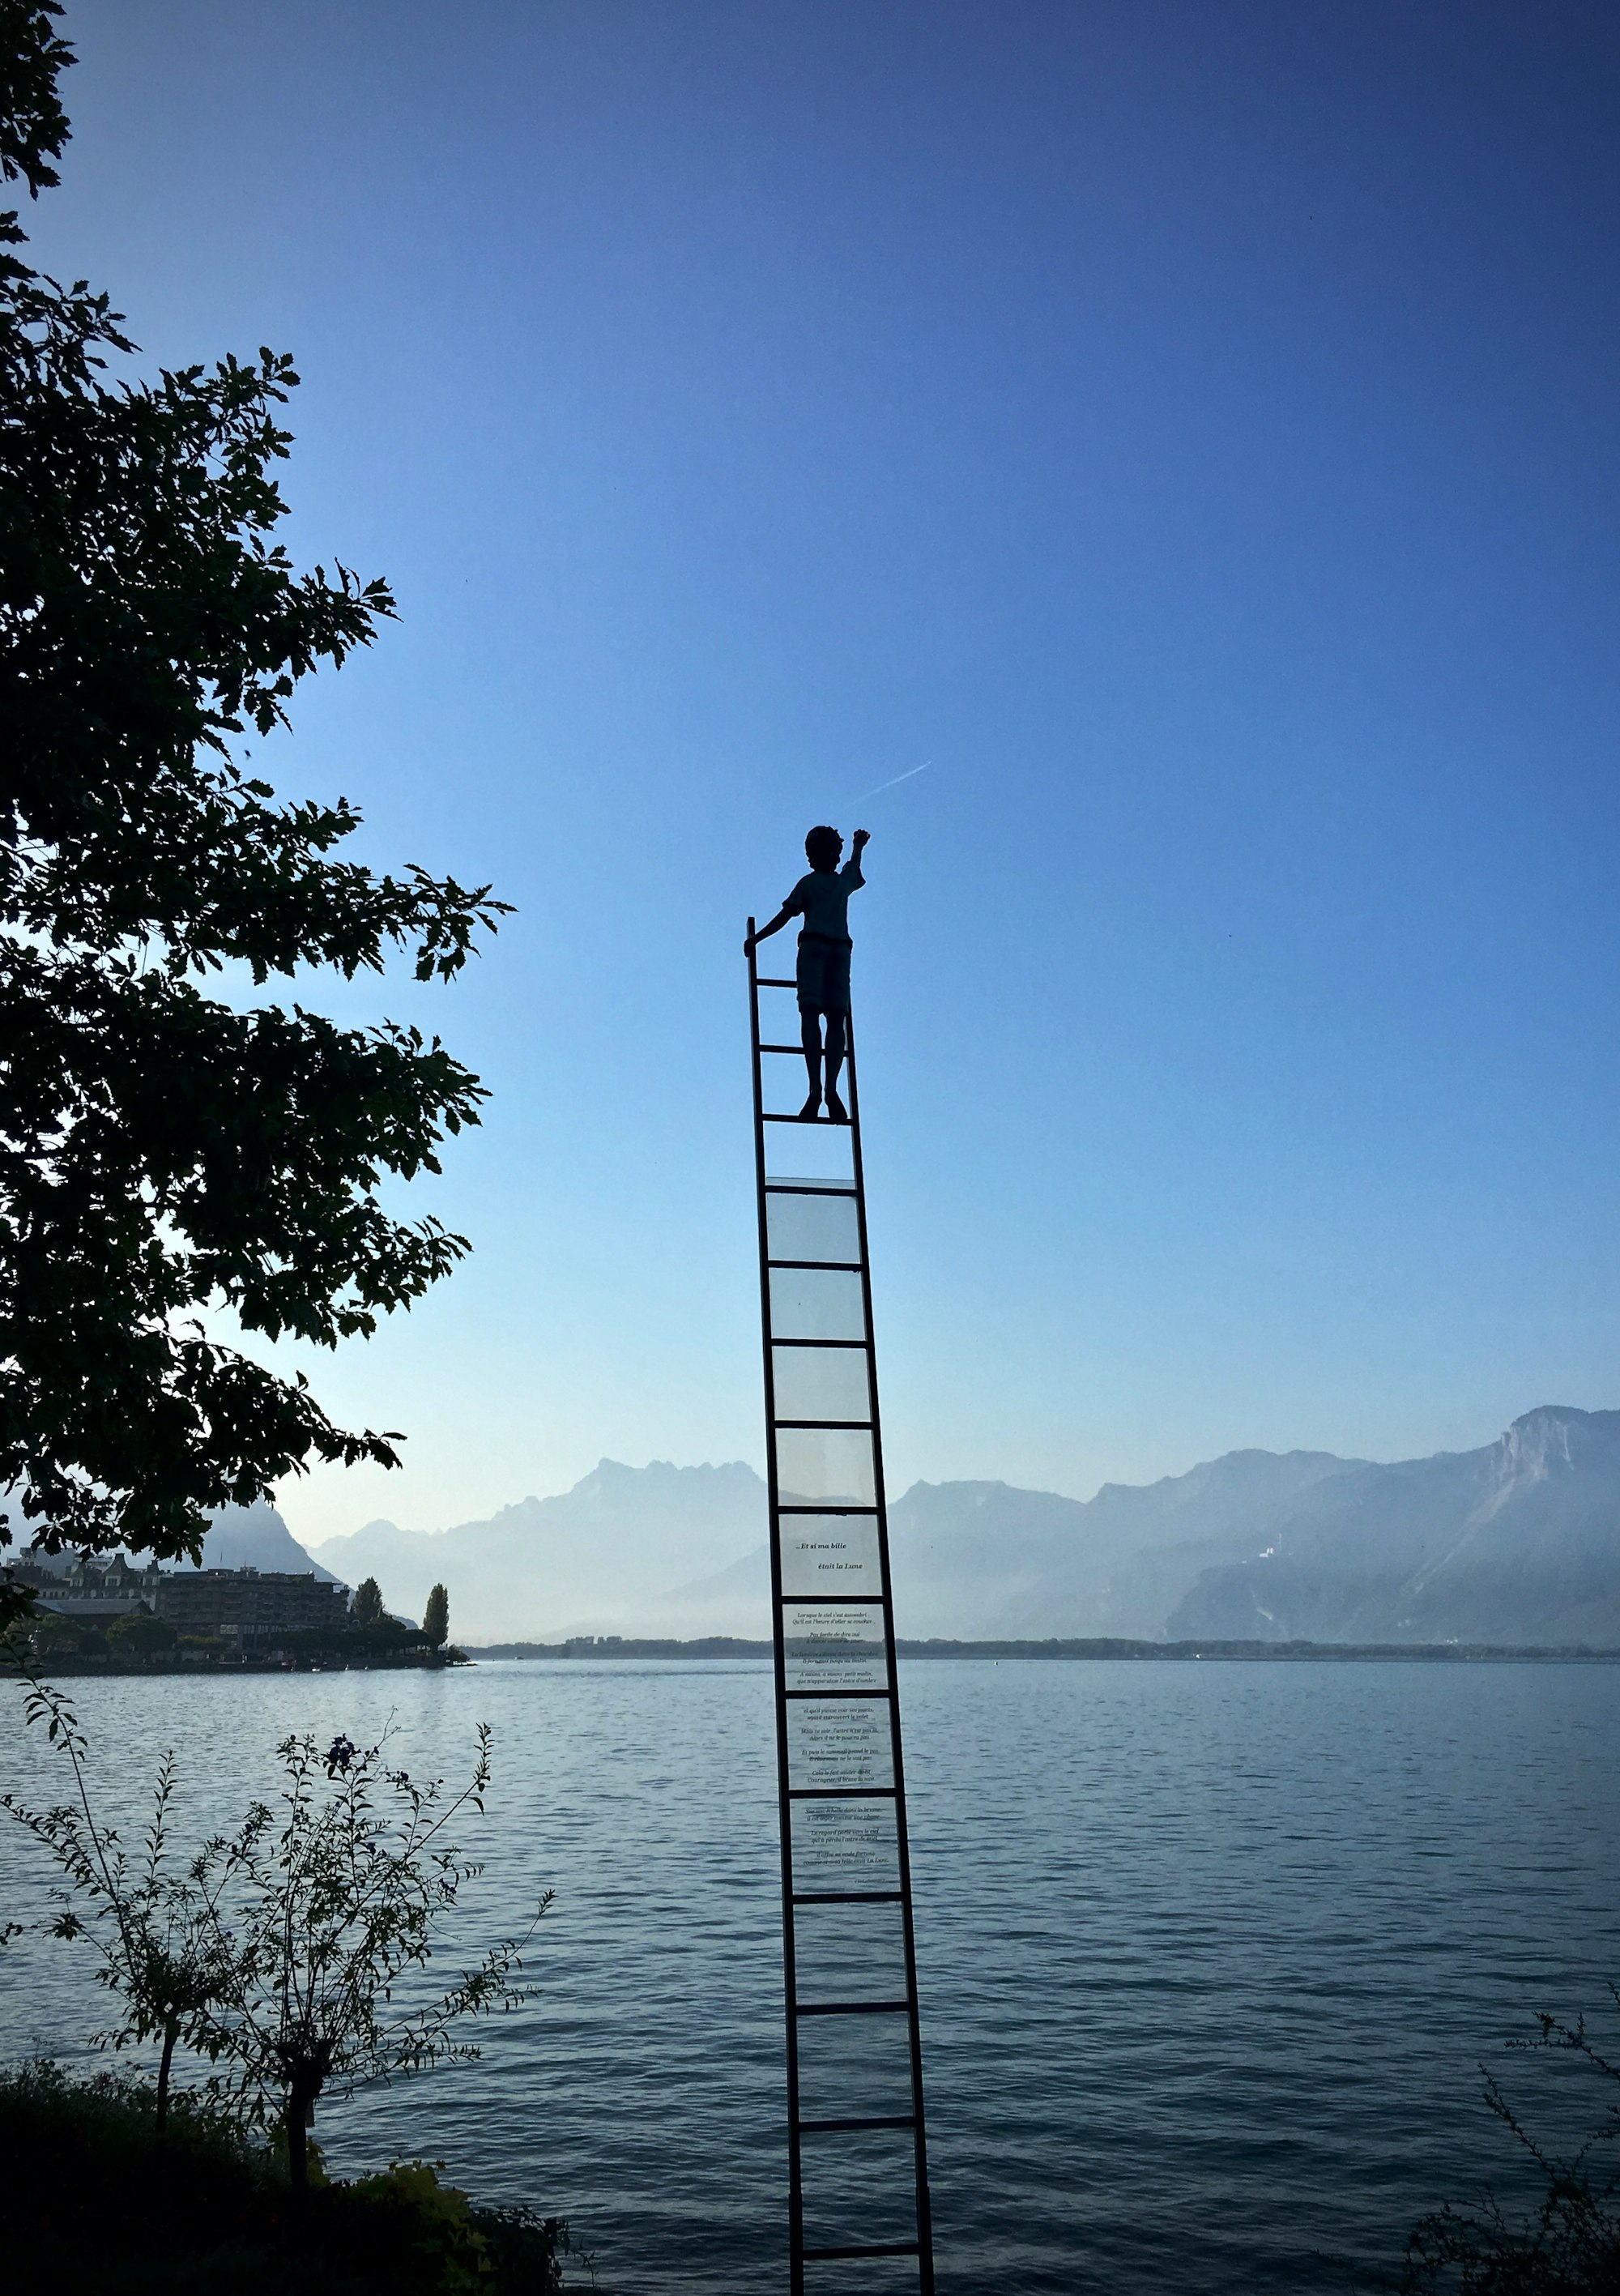 Man on a ladder over a lake